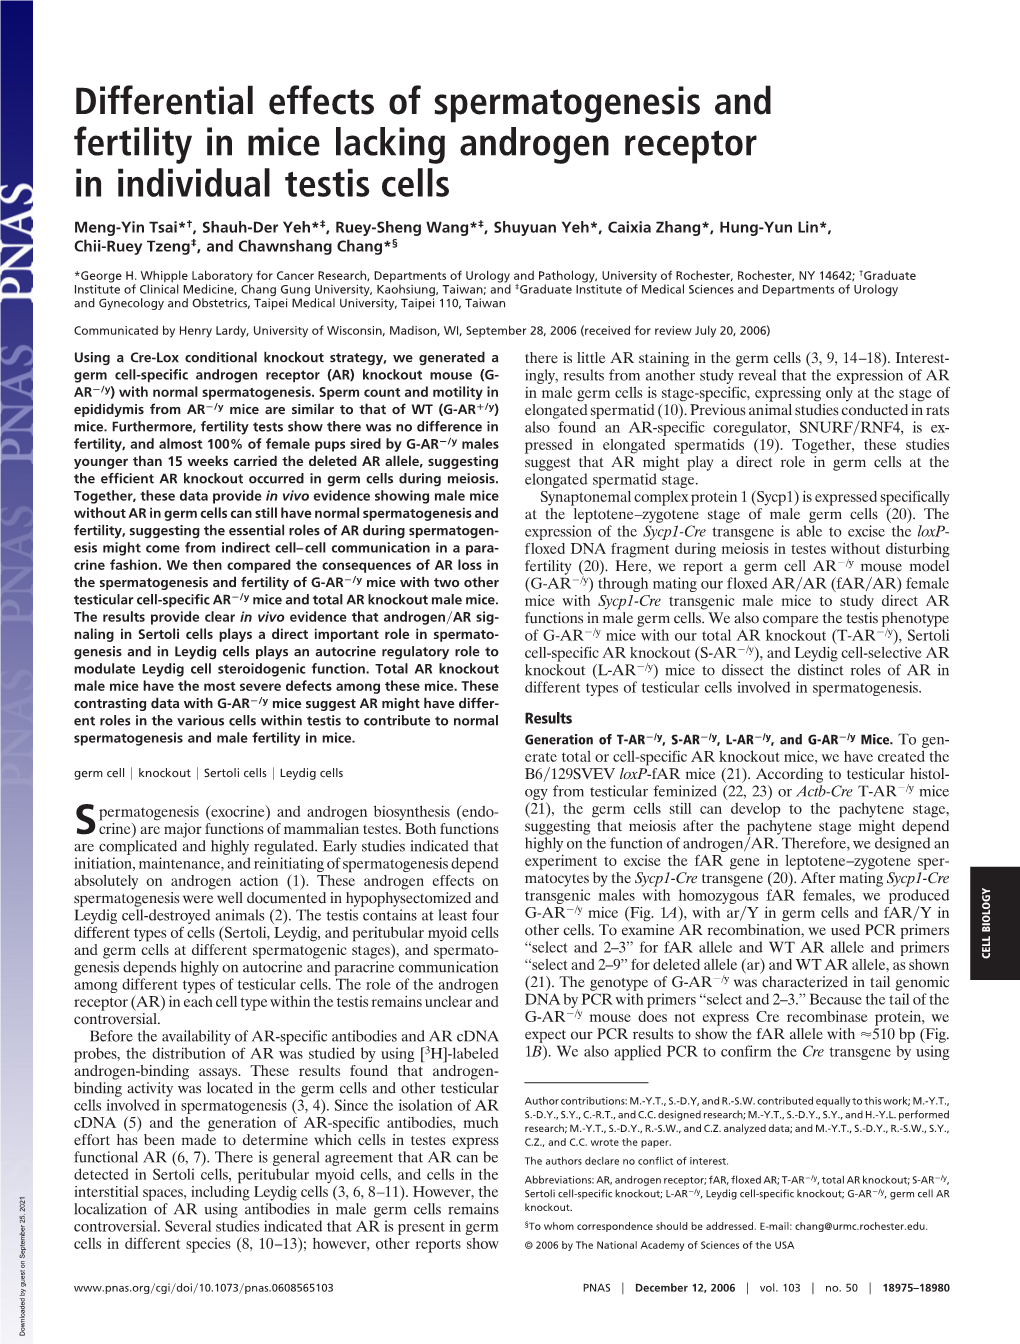 Differential Effects of Spermatogenesis and Fertility in Mice Lacking Androgen Receptor in Individual Testis Cells